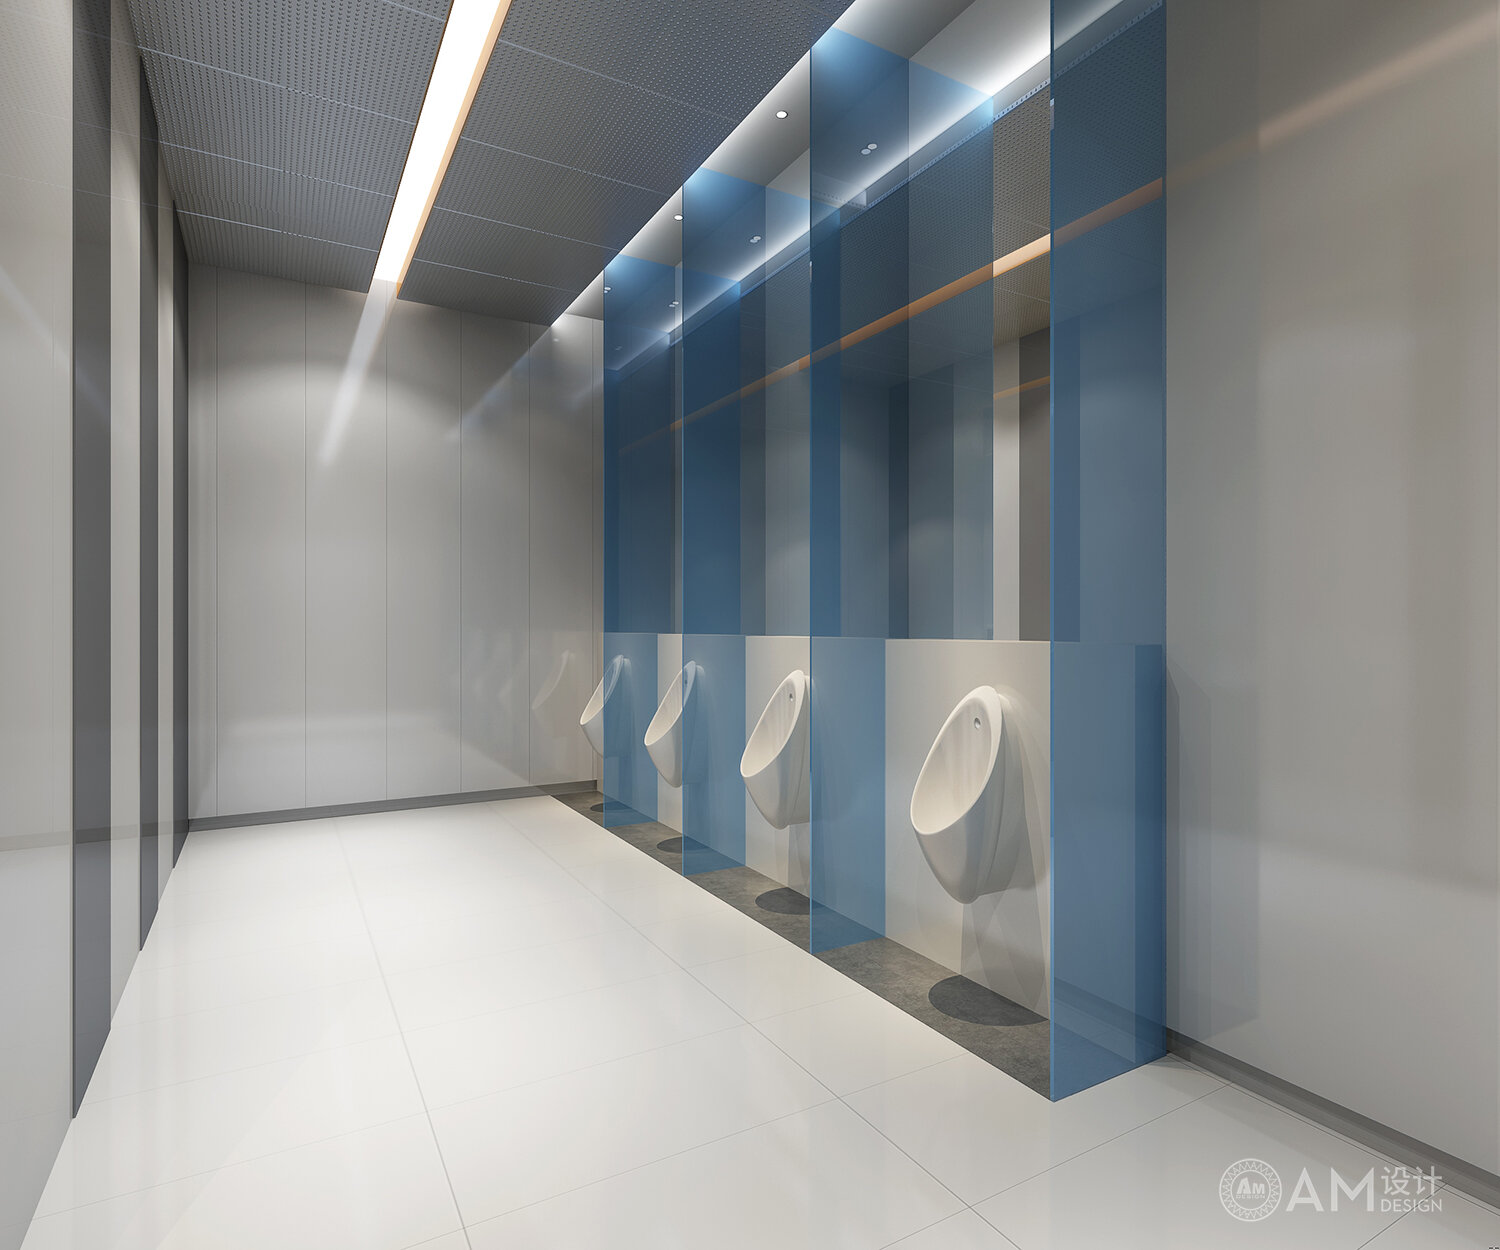 AM DESIGN | Bathroom Design of Thermal Office Building in Tongzhou New City, Beijing